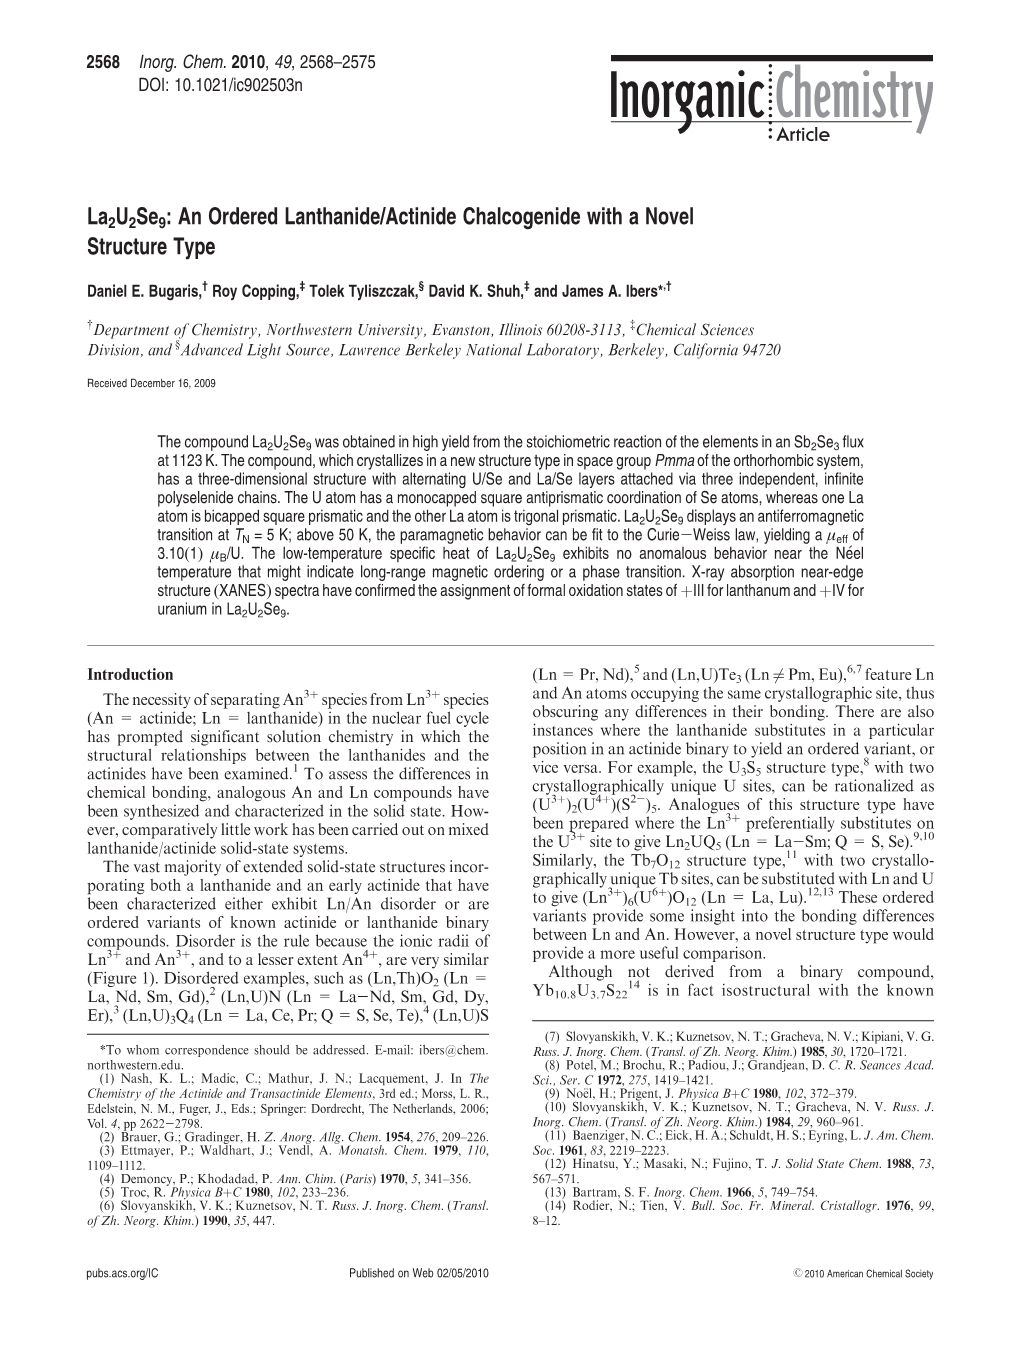 La2u2se9: an Ordered Lanthanide/Actinide Chalcogenide with a Novel Structure Type